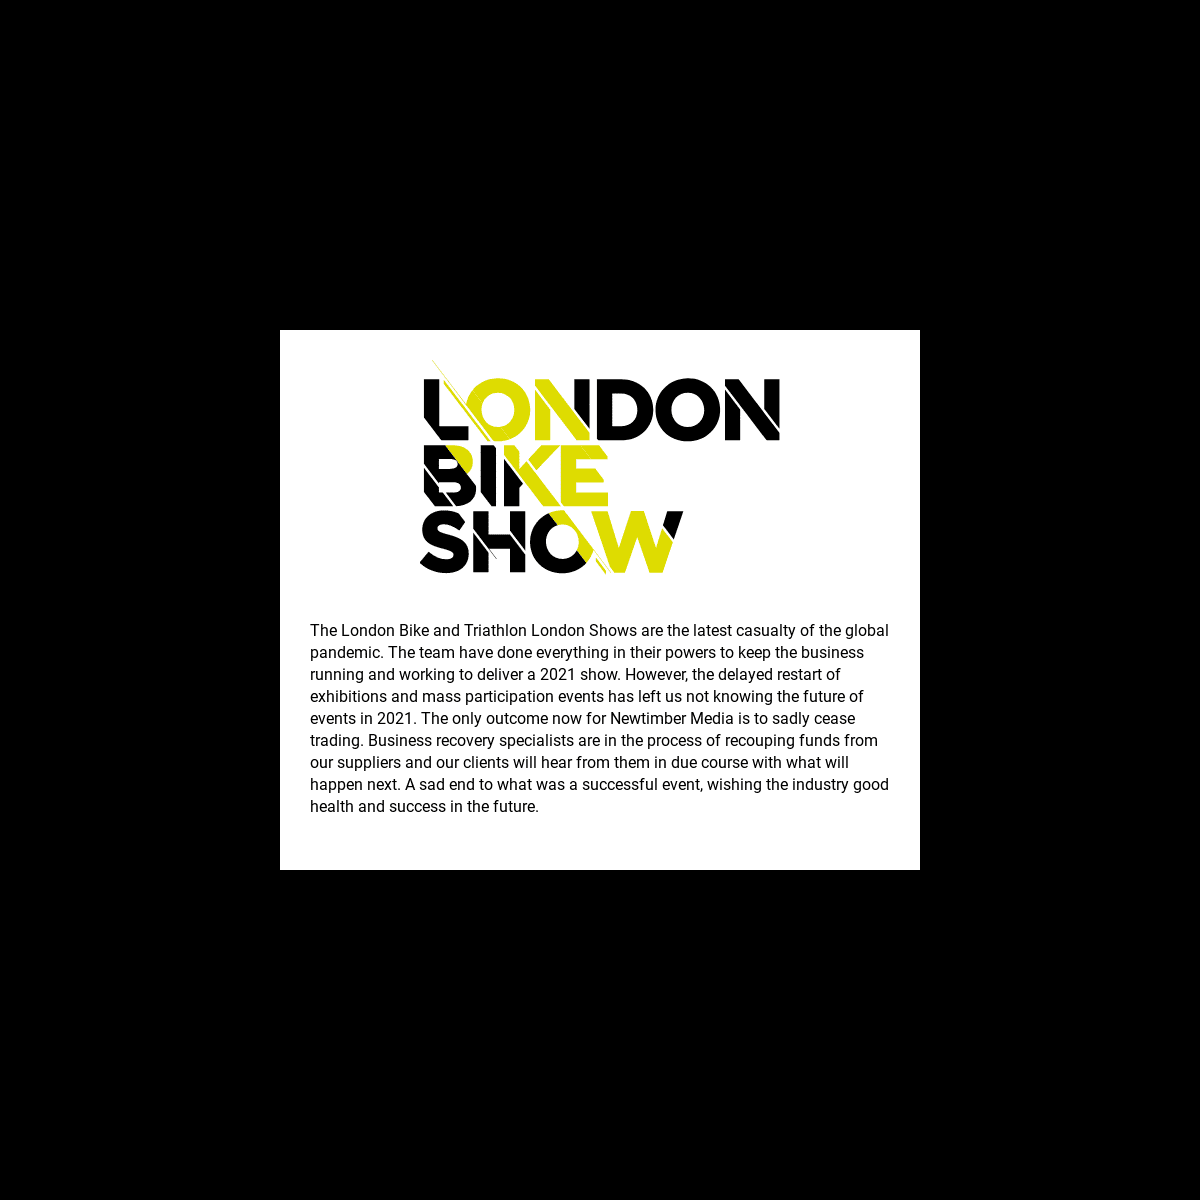 A complete backup of https://thelondonbikeshow.co.uk